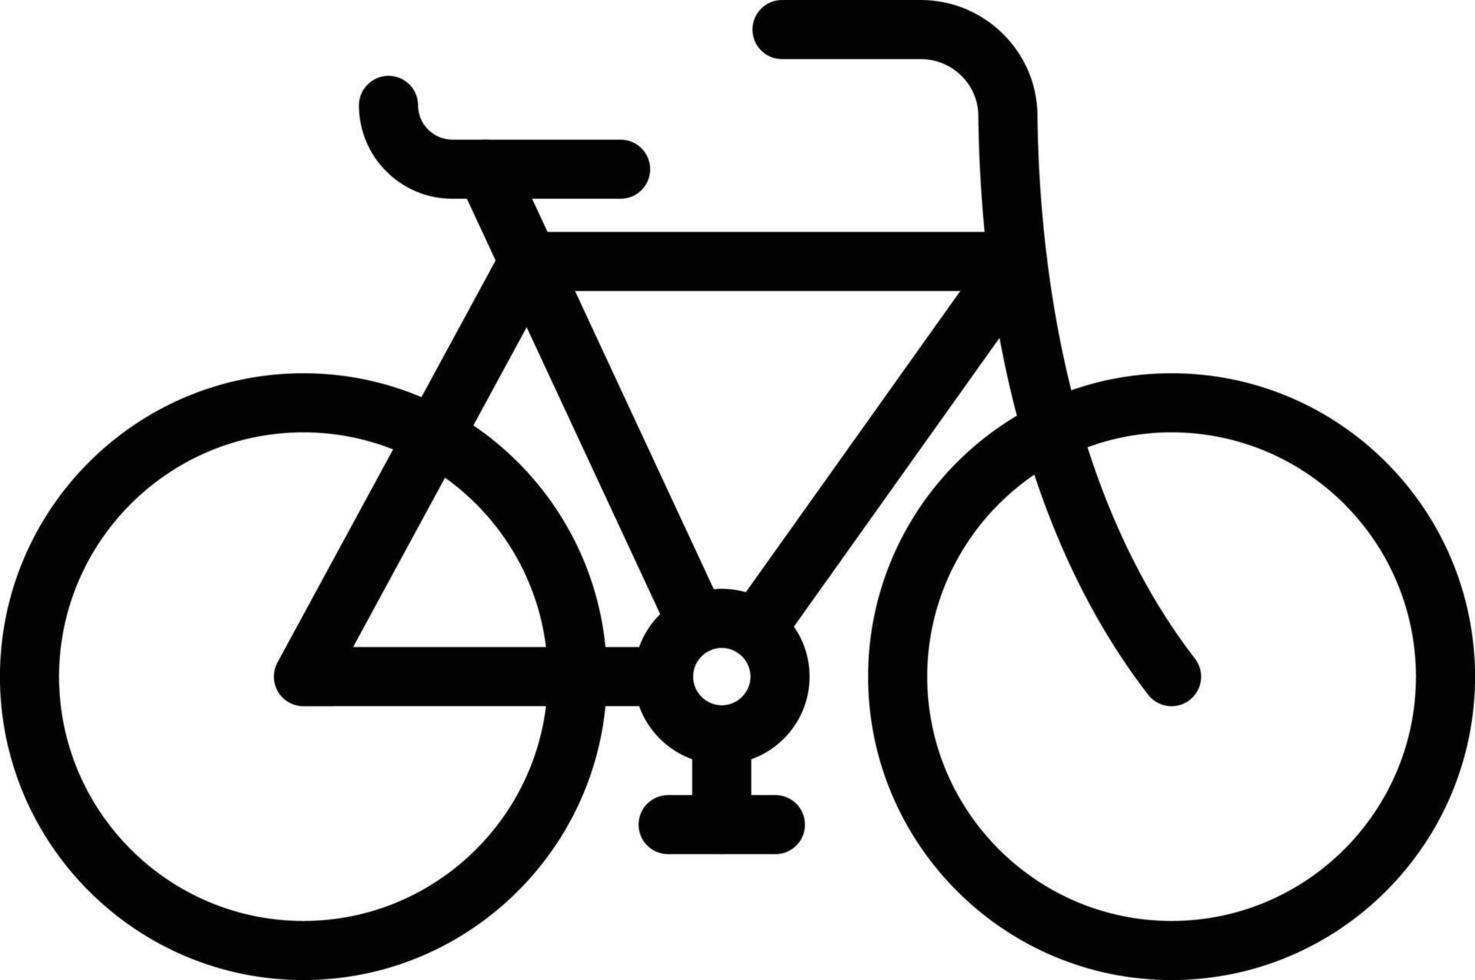 cycle vector illustration on a background.Premium quality symbols.vector icons for concept and graphic design.